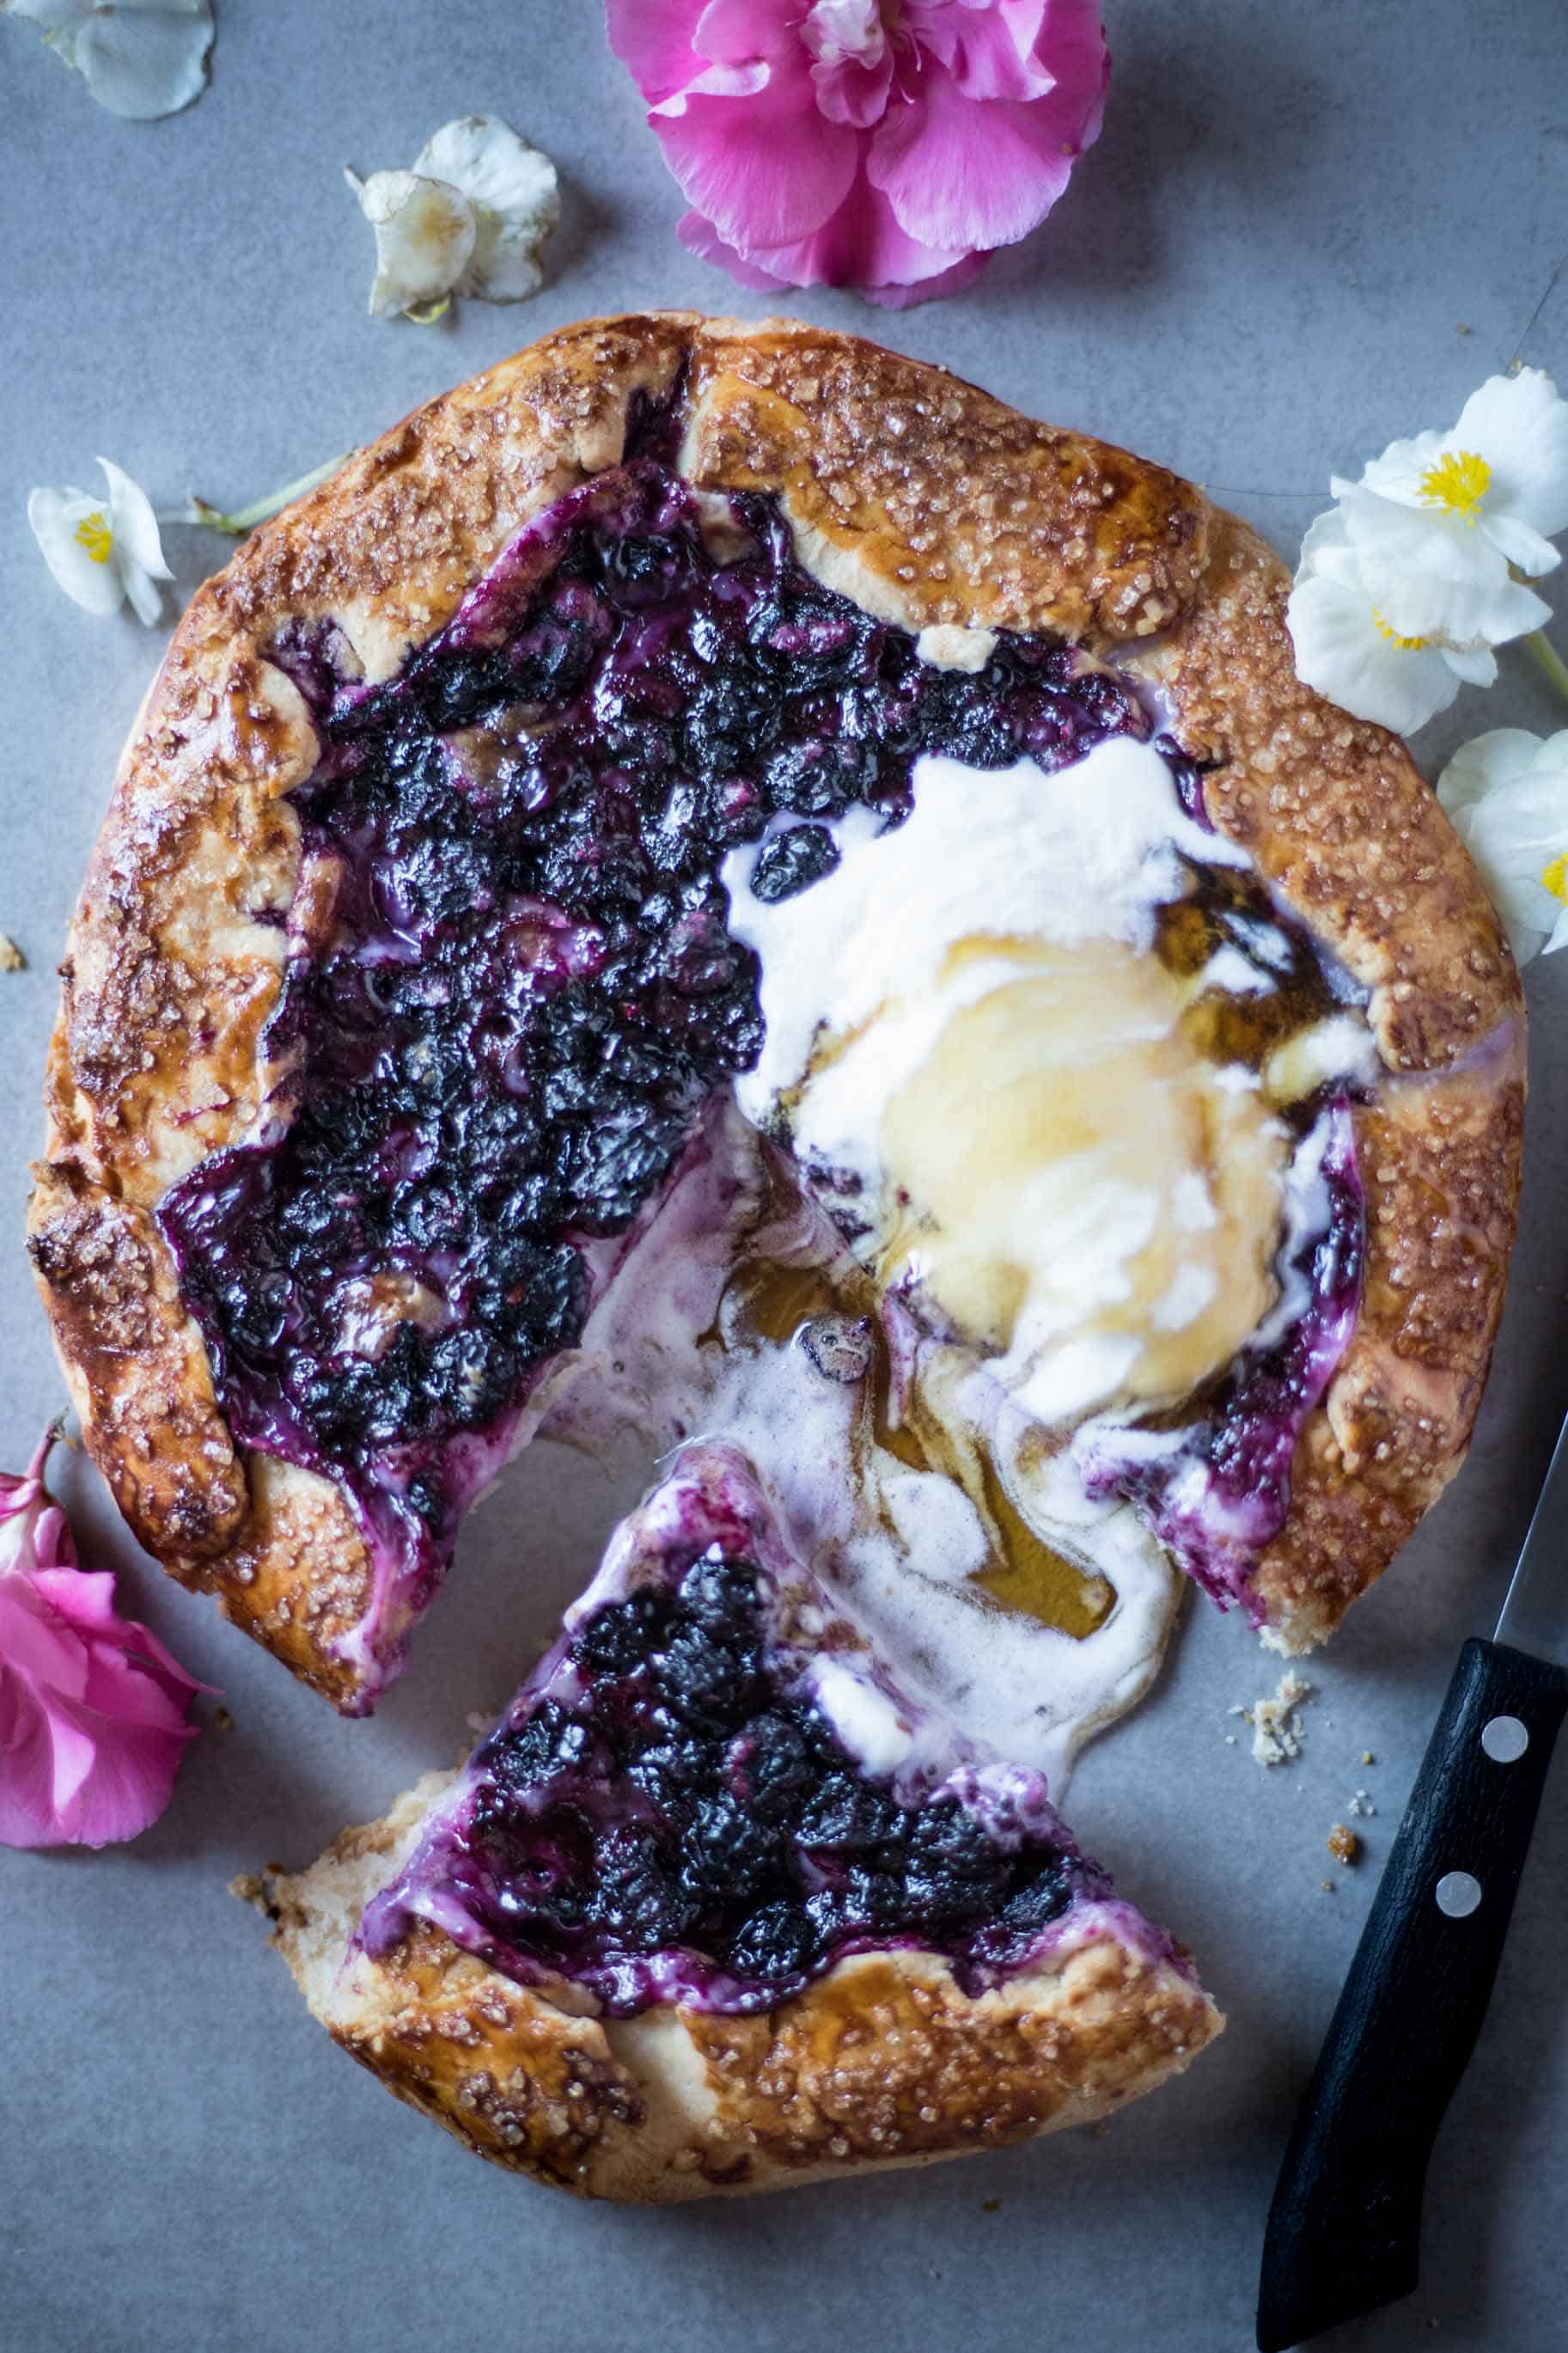 Simple and easy to make Gluten Free Blueberry and Cream Cheese Galette. This Galette is low FODMAP and easy to digest and super delicious!